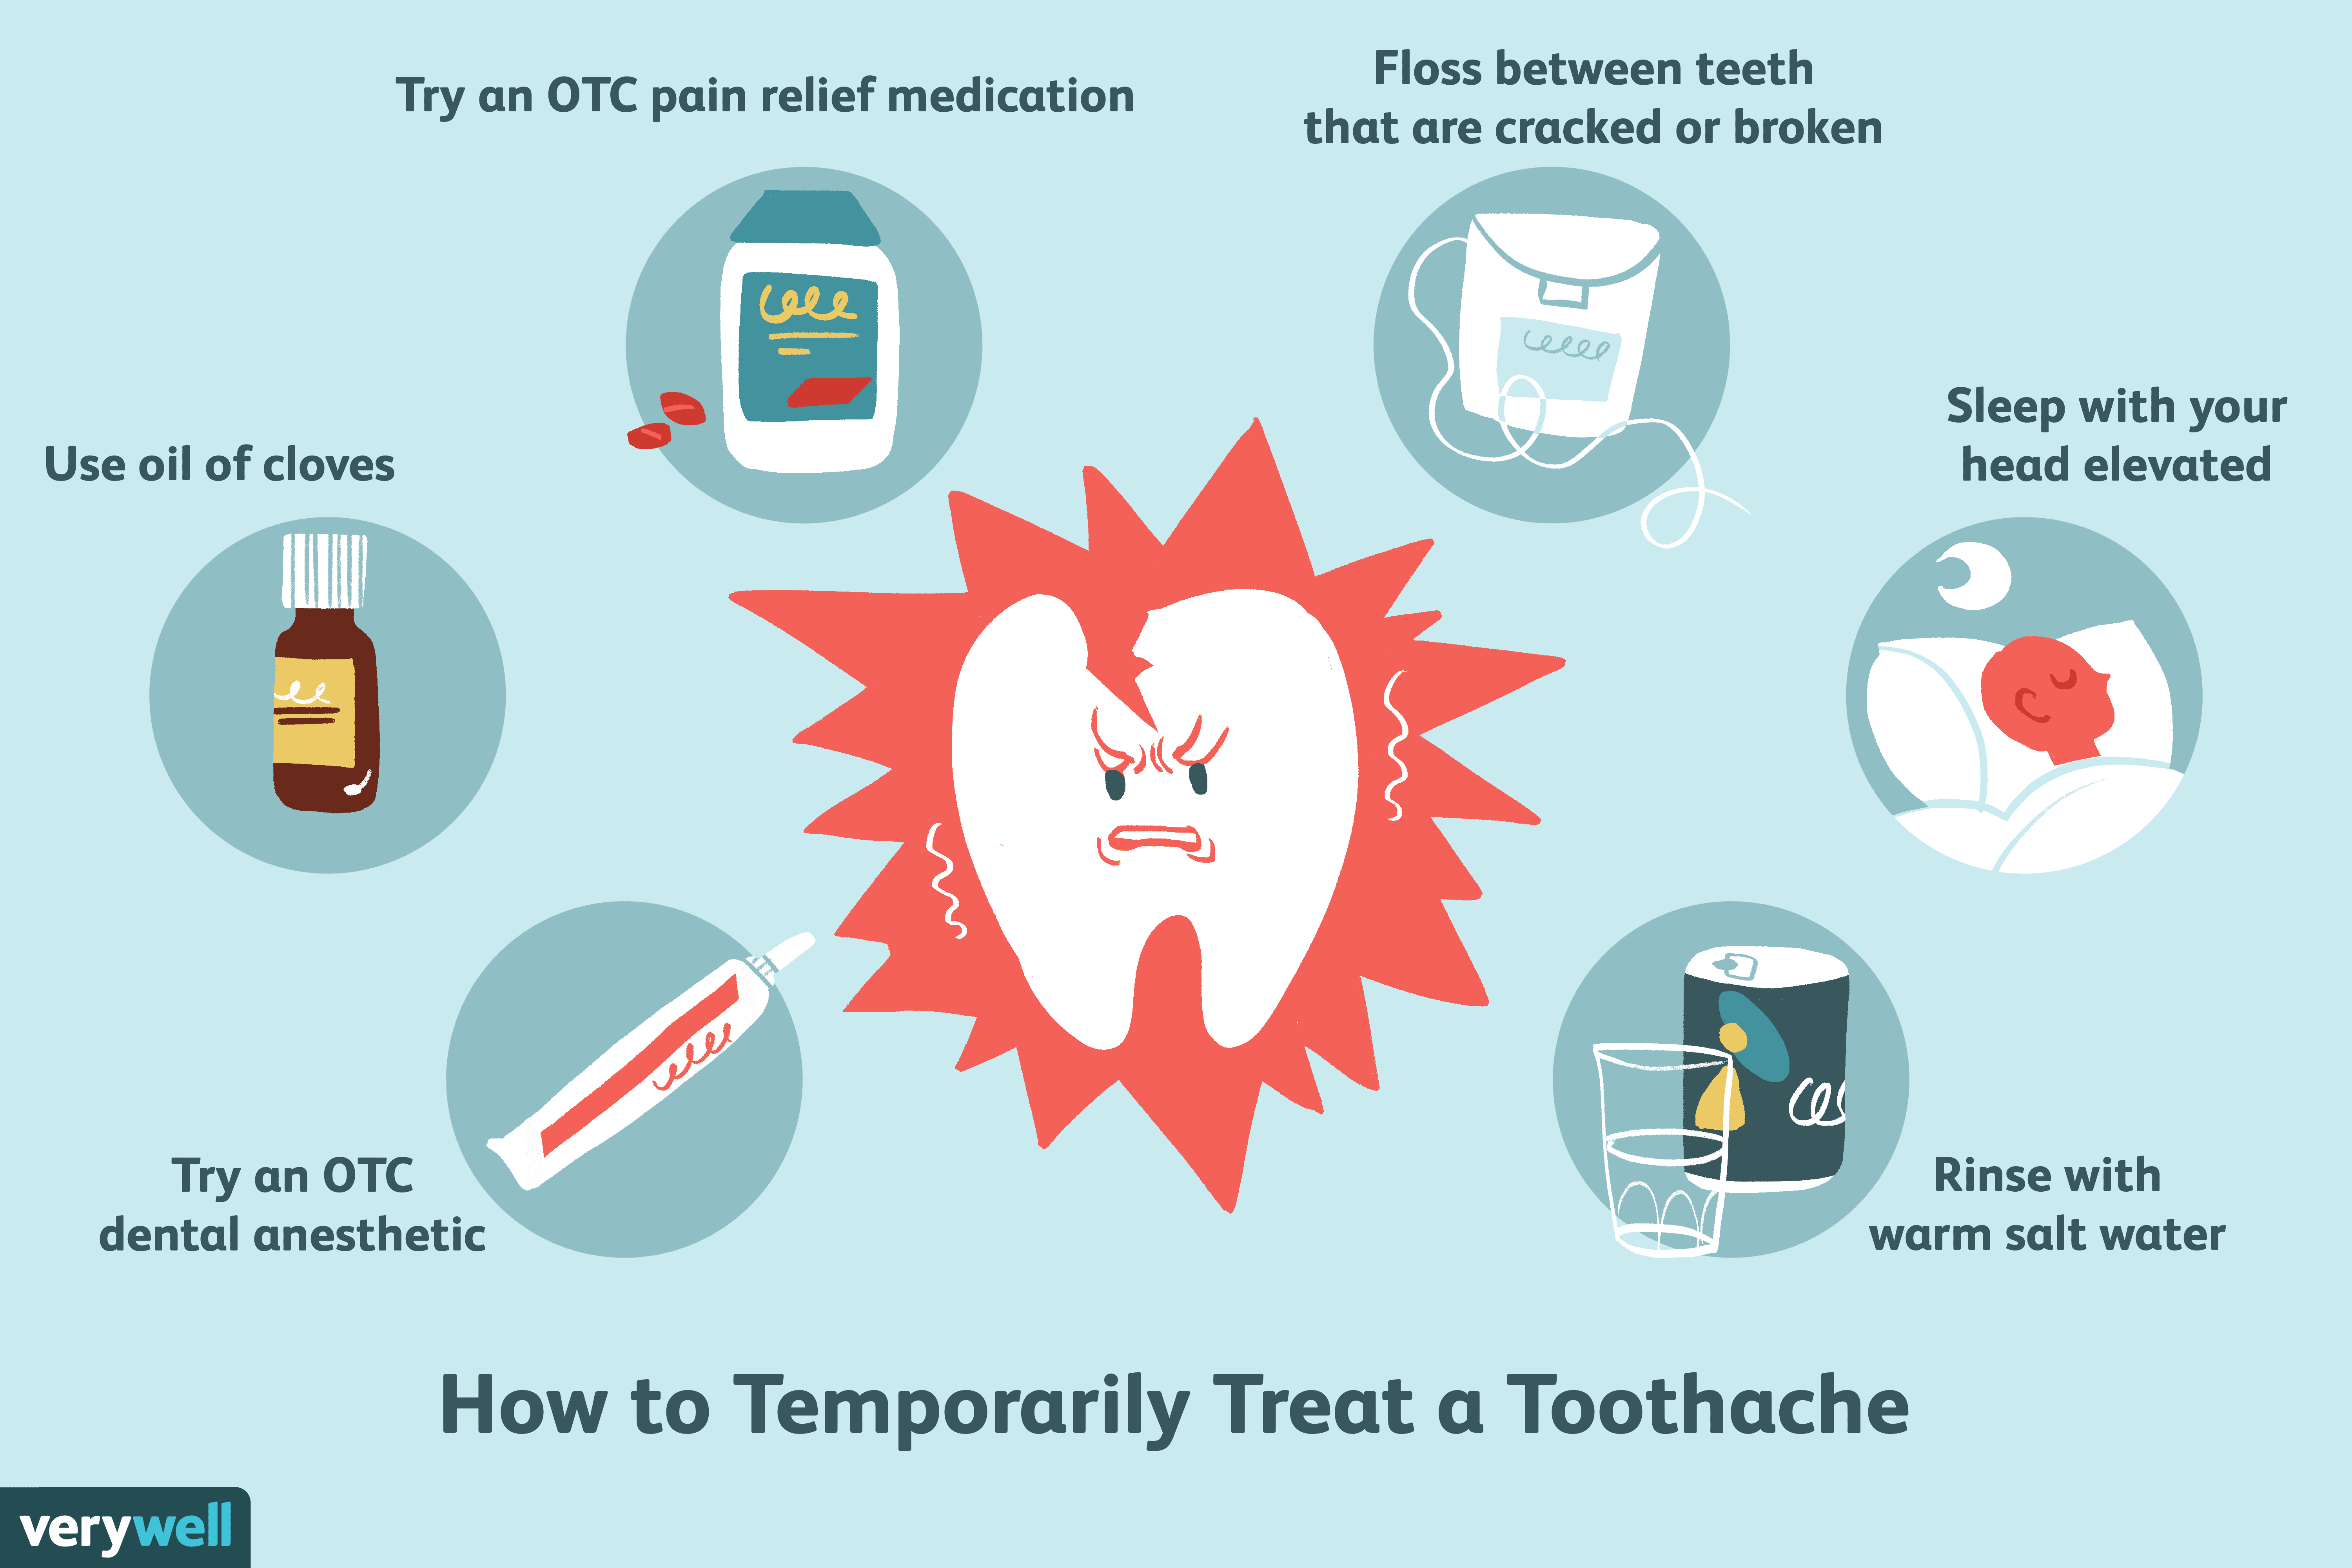 How to Relieve Pain From a Cracked or Broken Tooth